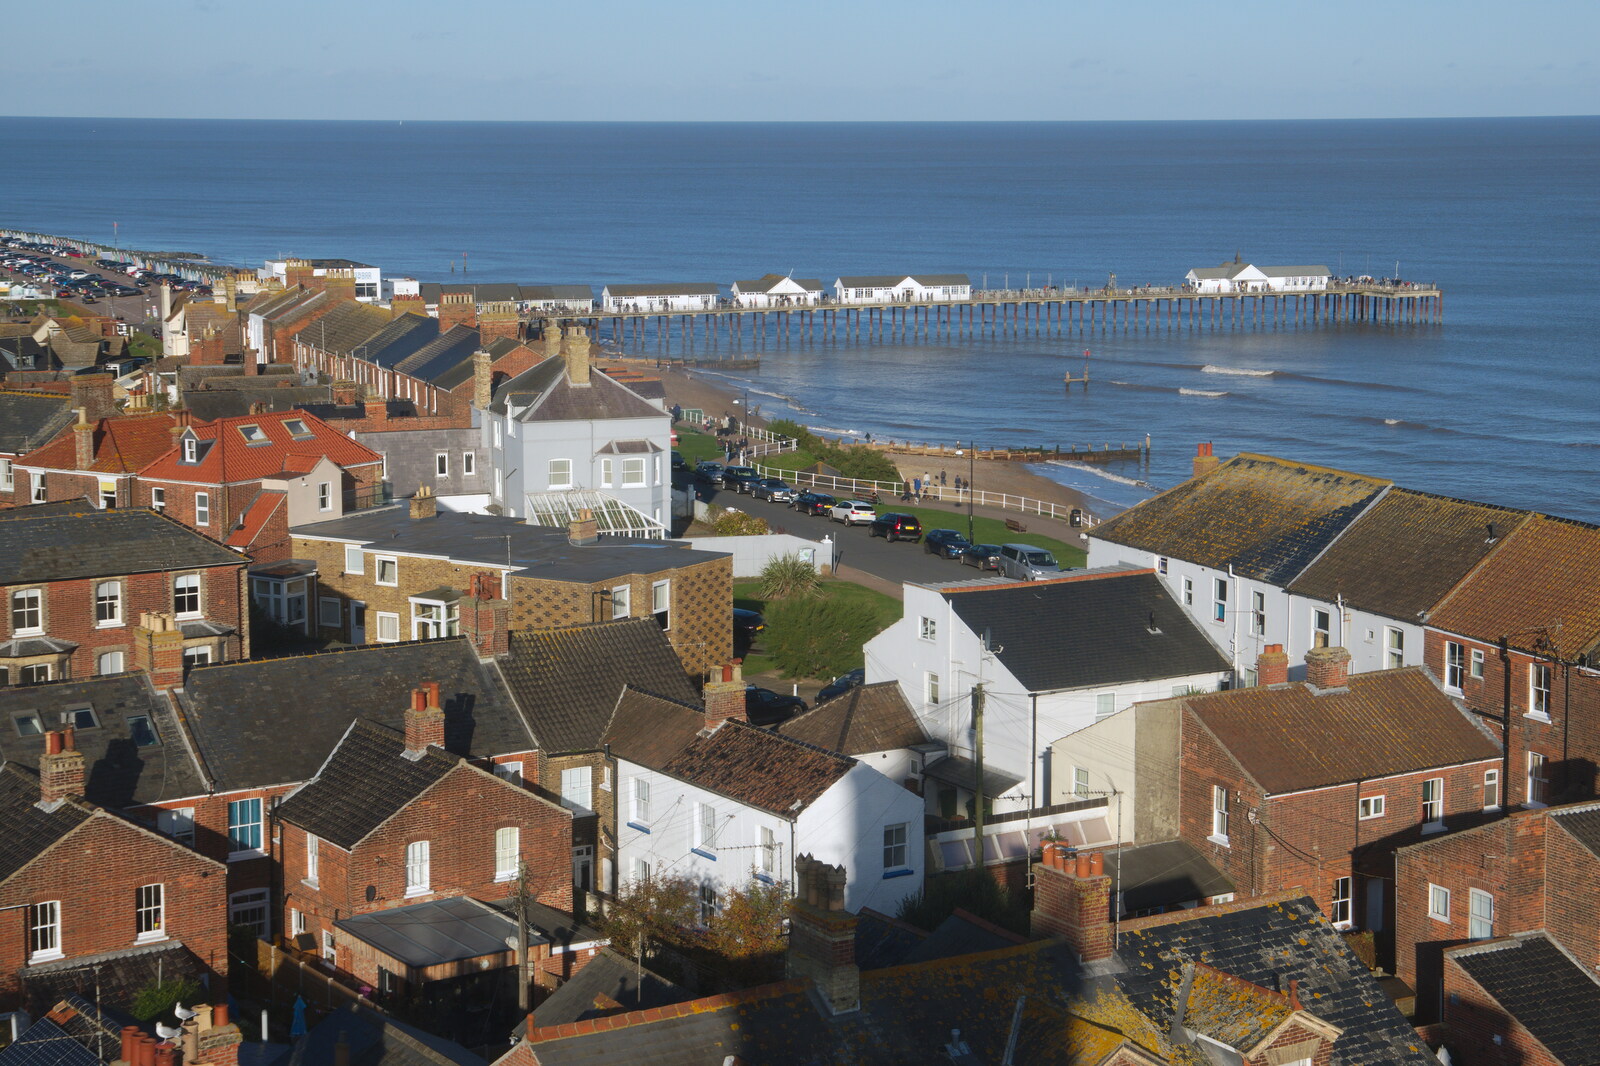 Southwold Pier from the lighthouse from A Trip up a Lighthouse, Southwold, Suffolk - 27th October 2019